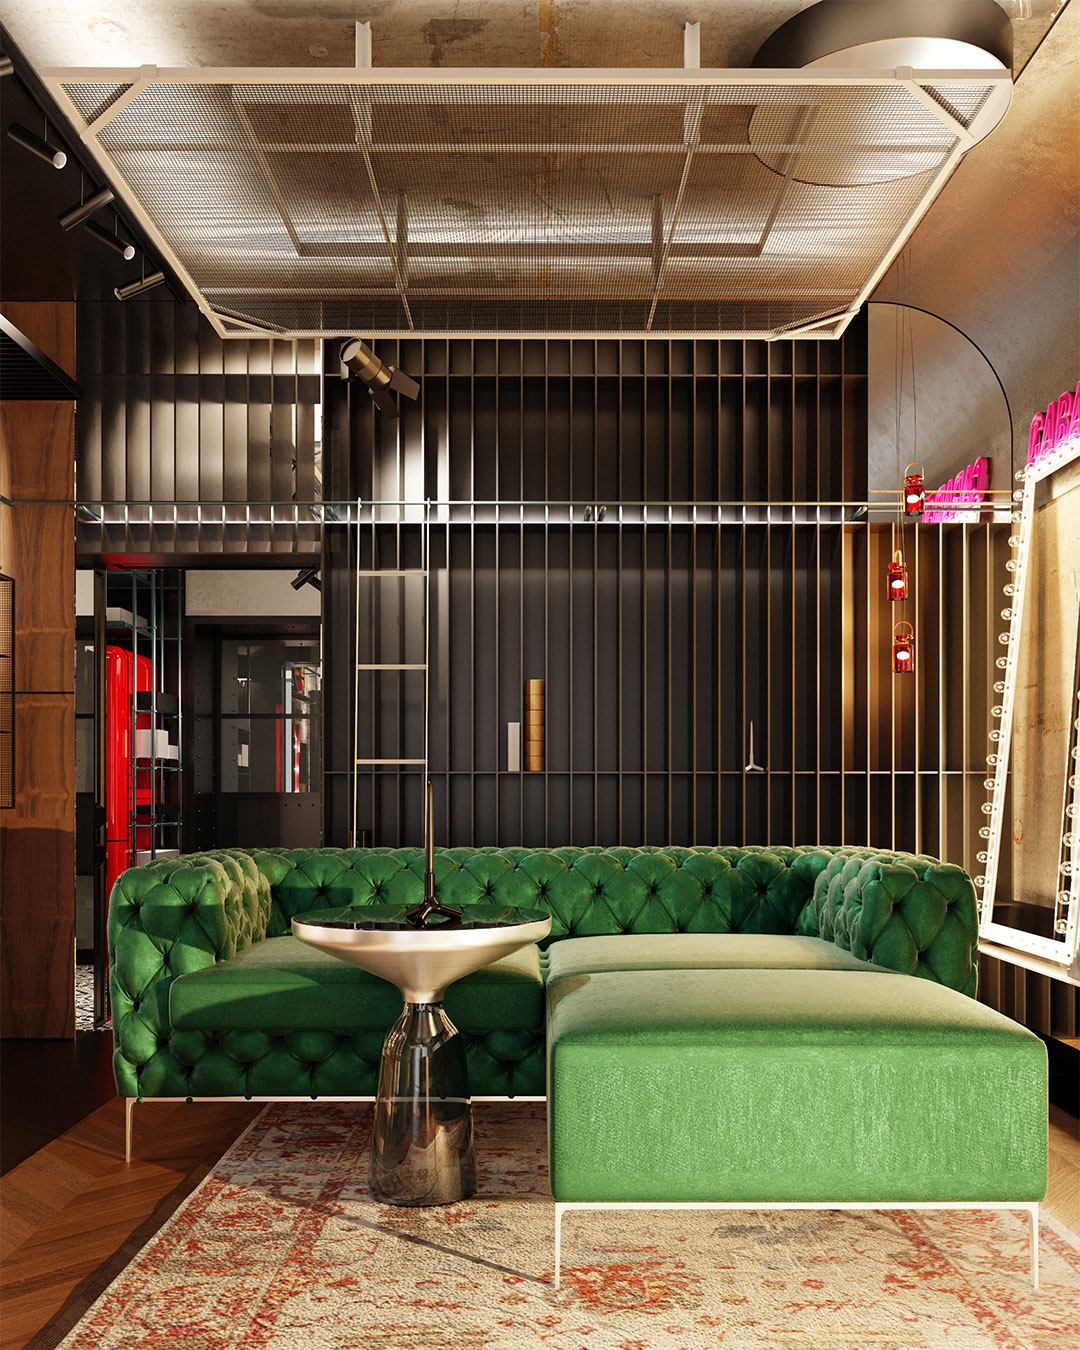 Industrial opulence design with green chesterfield sofa, visualized in 3d.